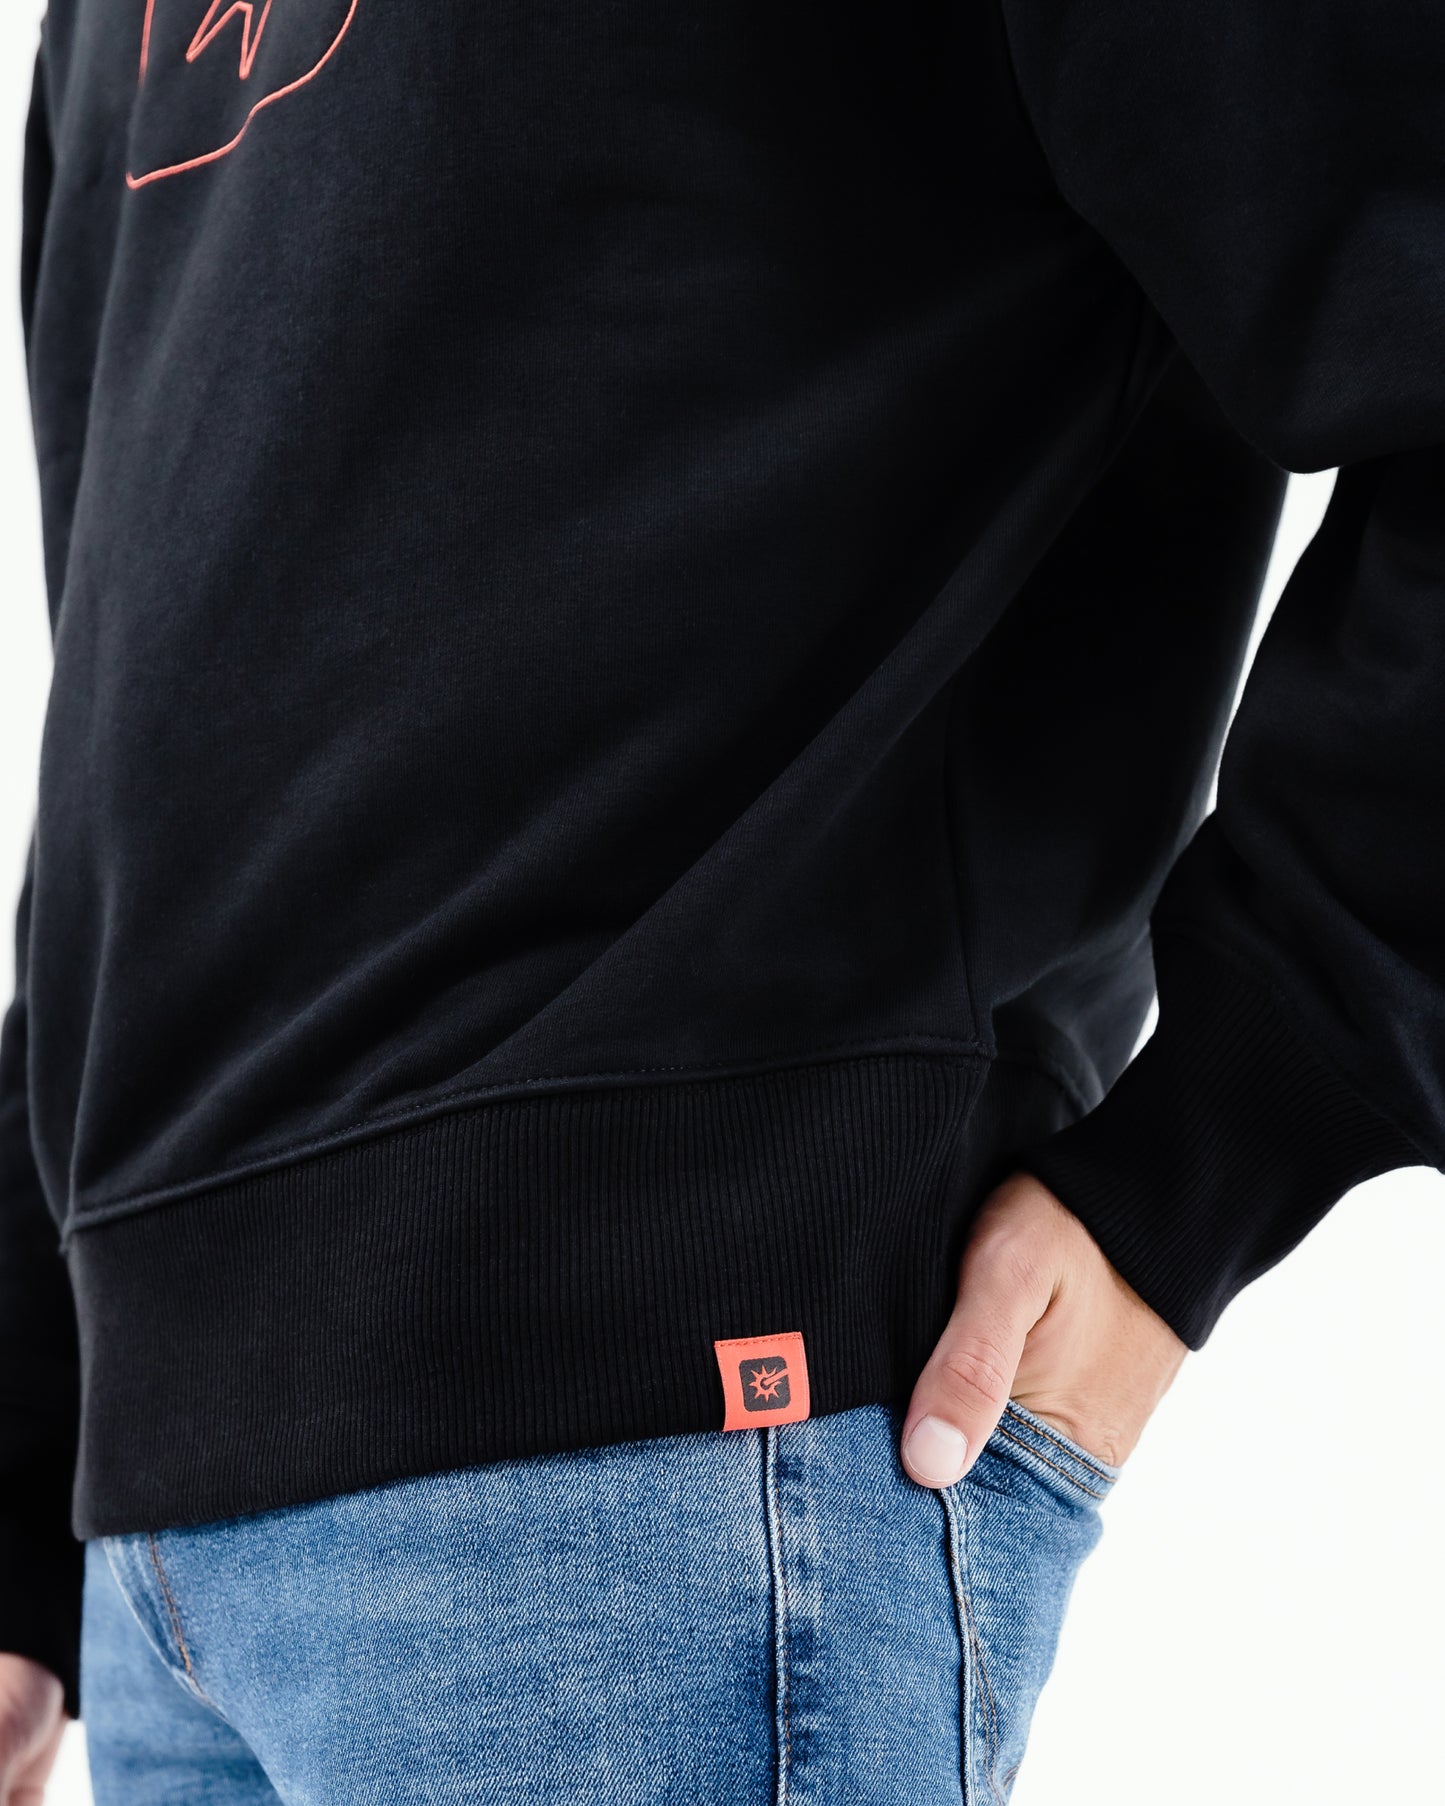 The Flow Black Sweater